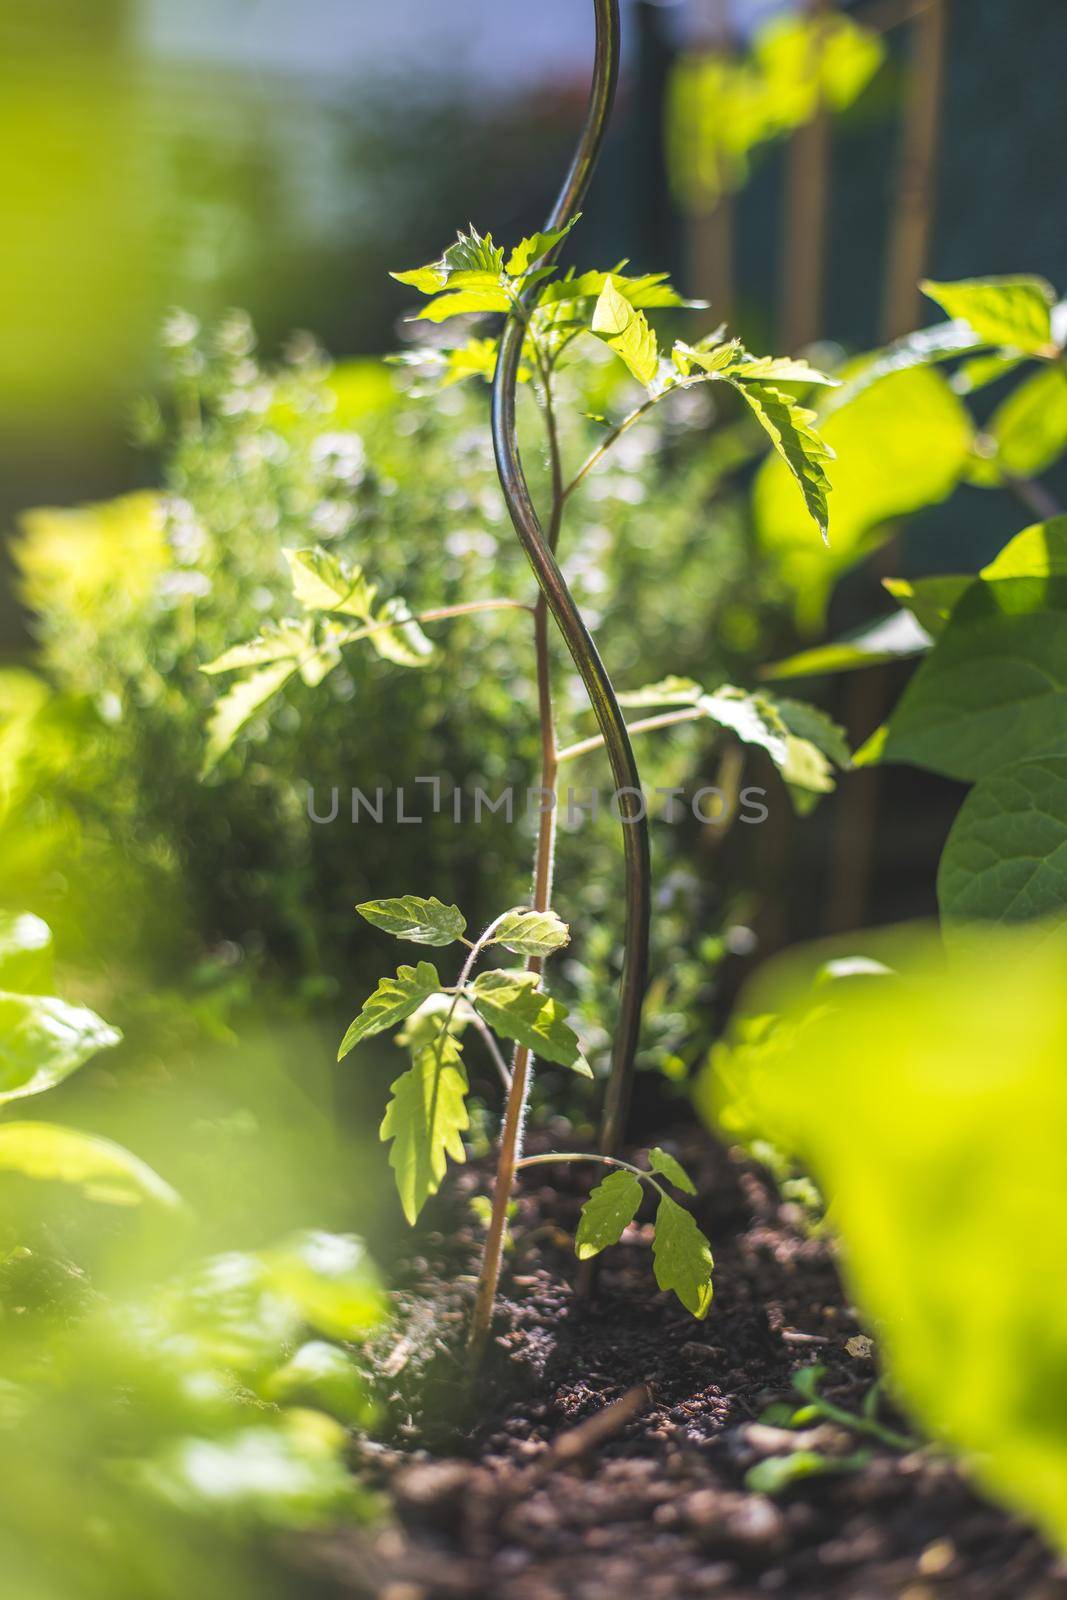 Tomato planting in the raised bed: young plants are growing in the sunlight by Daxenbichler